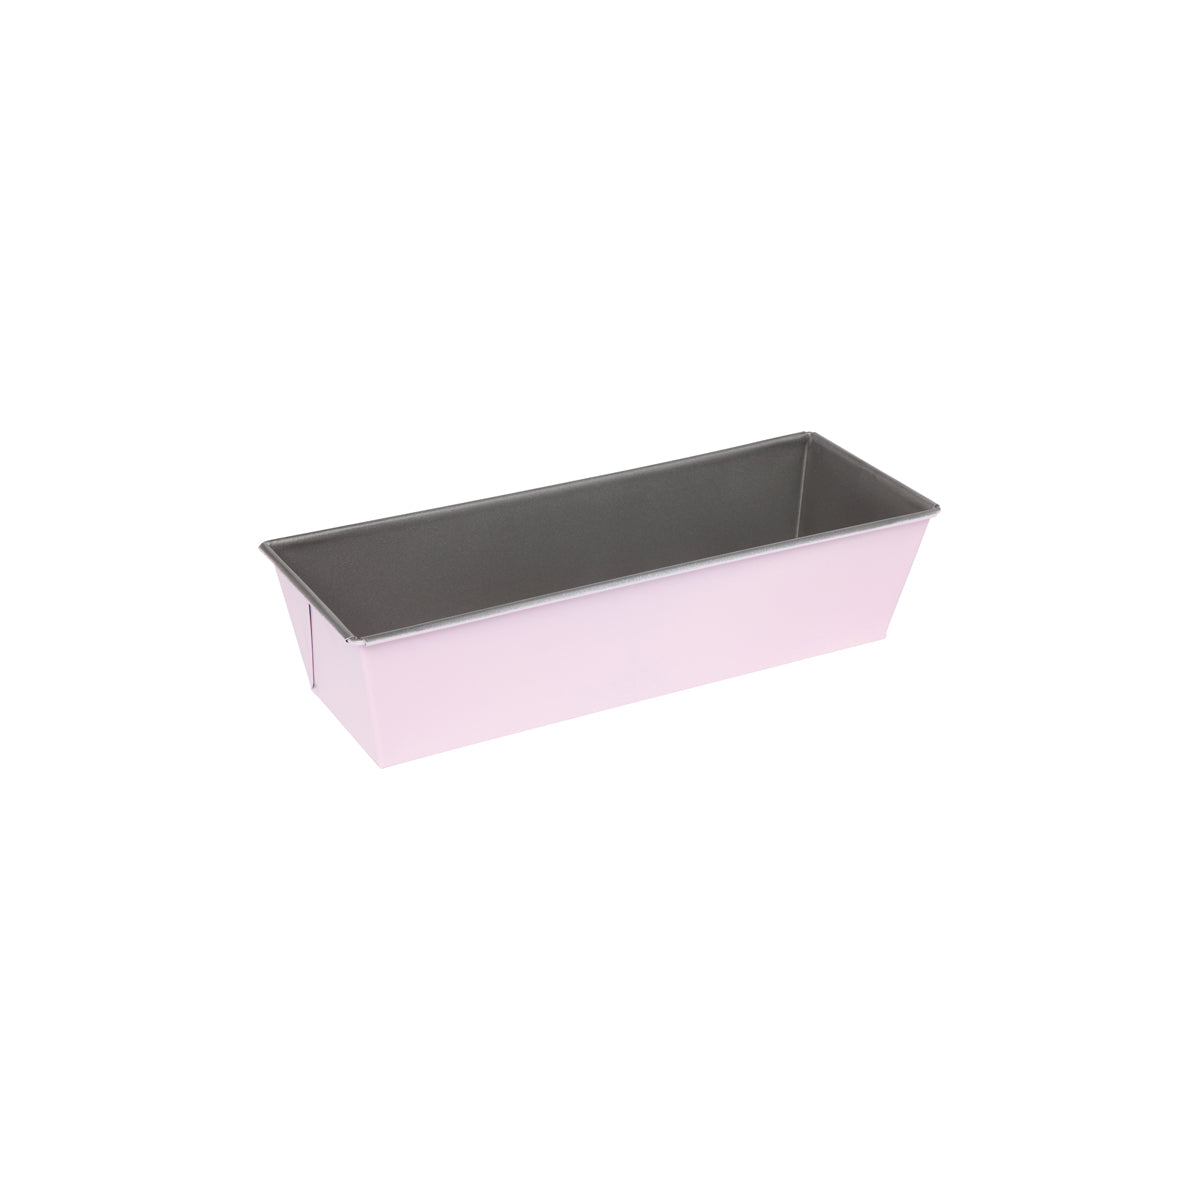 WLT40434 Wiltshire Two Toned Folded Loaf Pan 300x70mm Tomkin Australia Hospitality Supplies